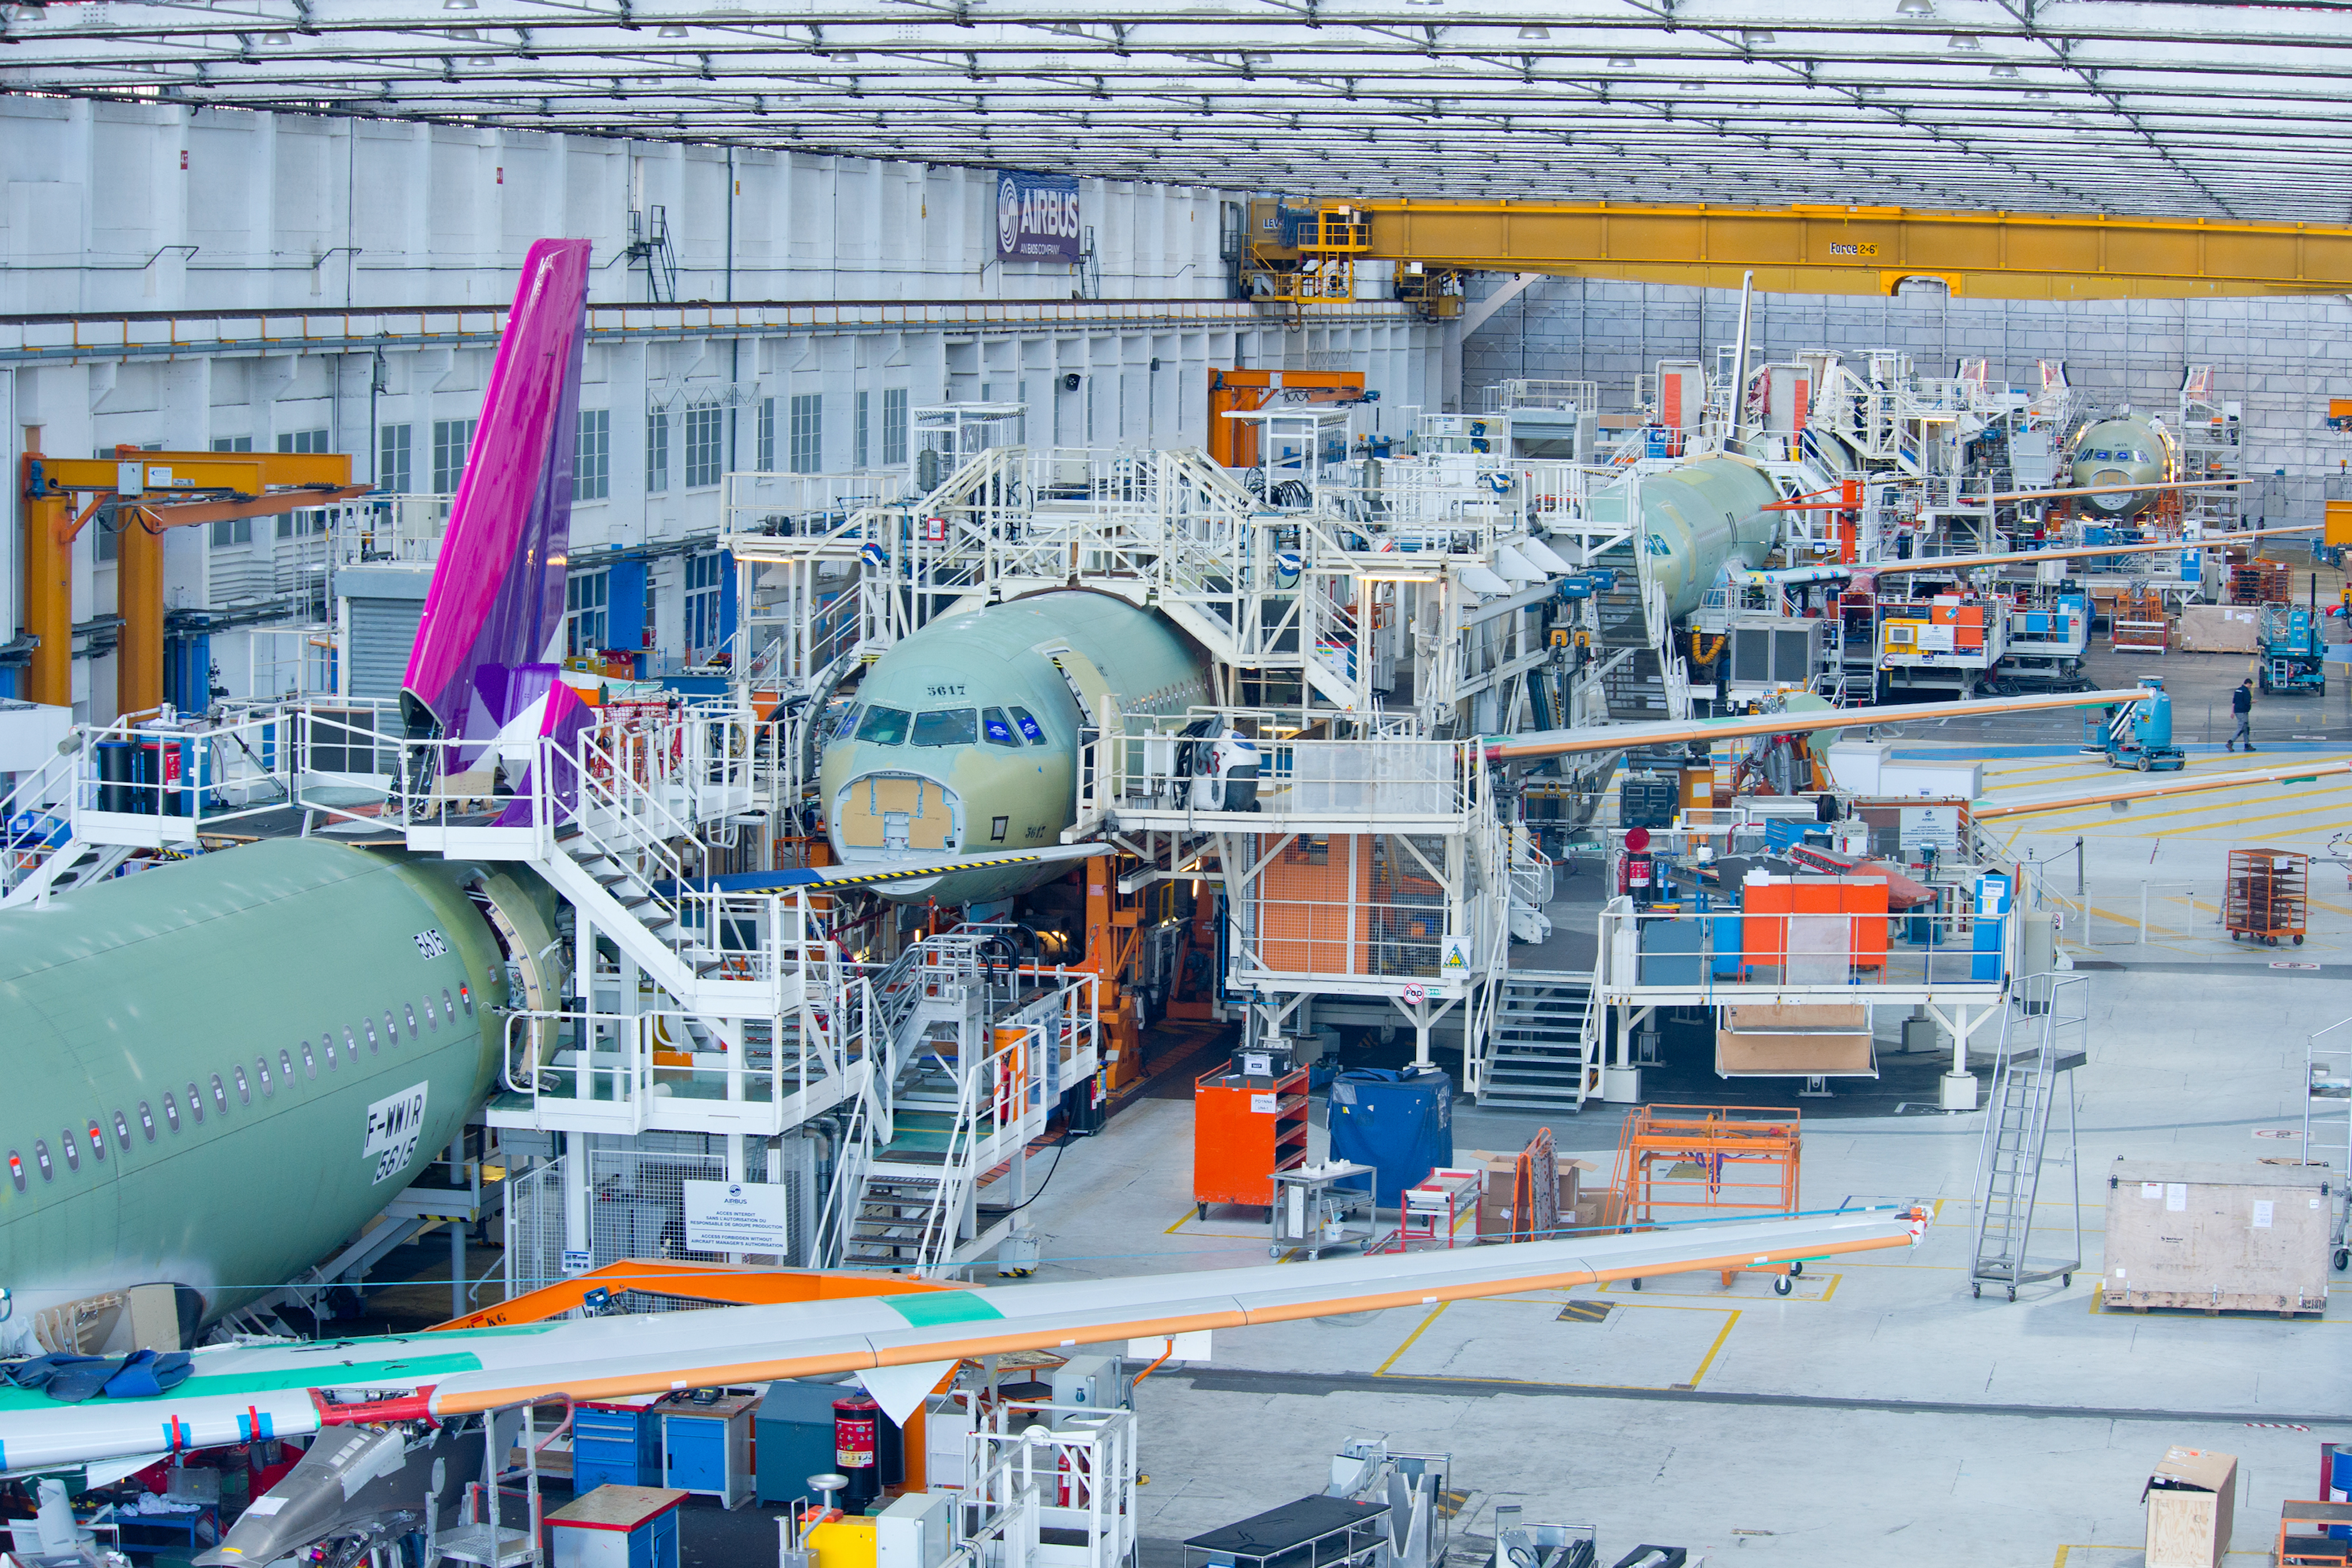 A320neos in the airbus factory